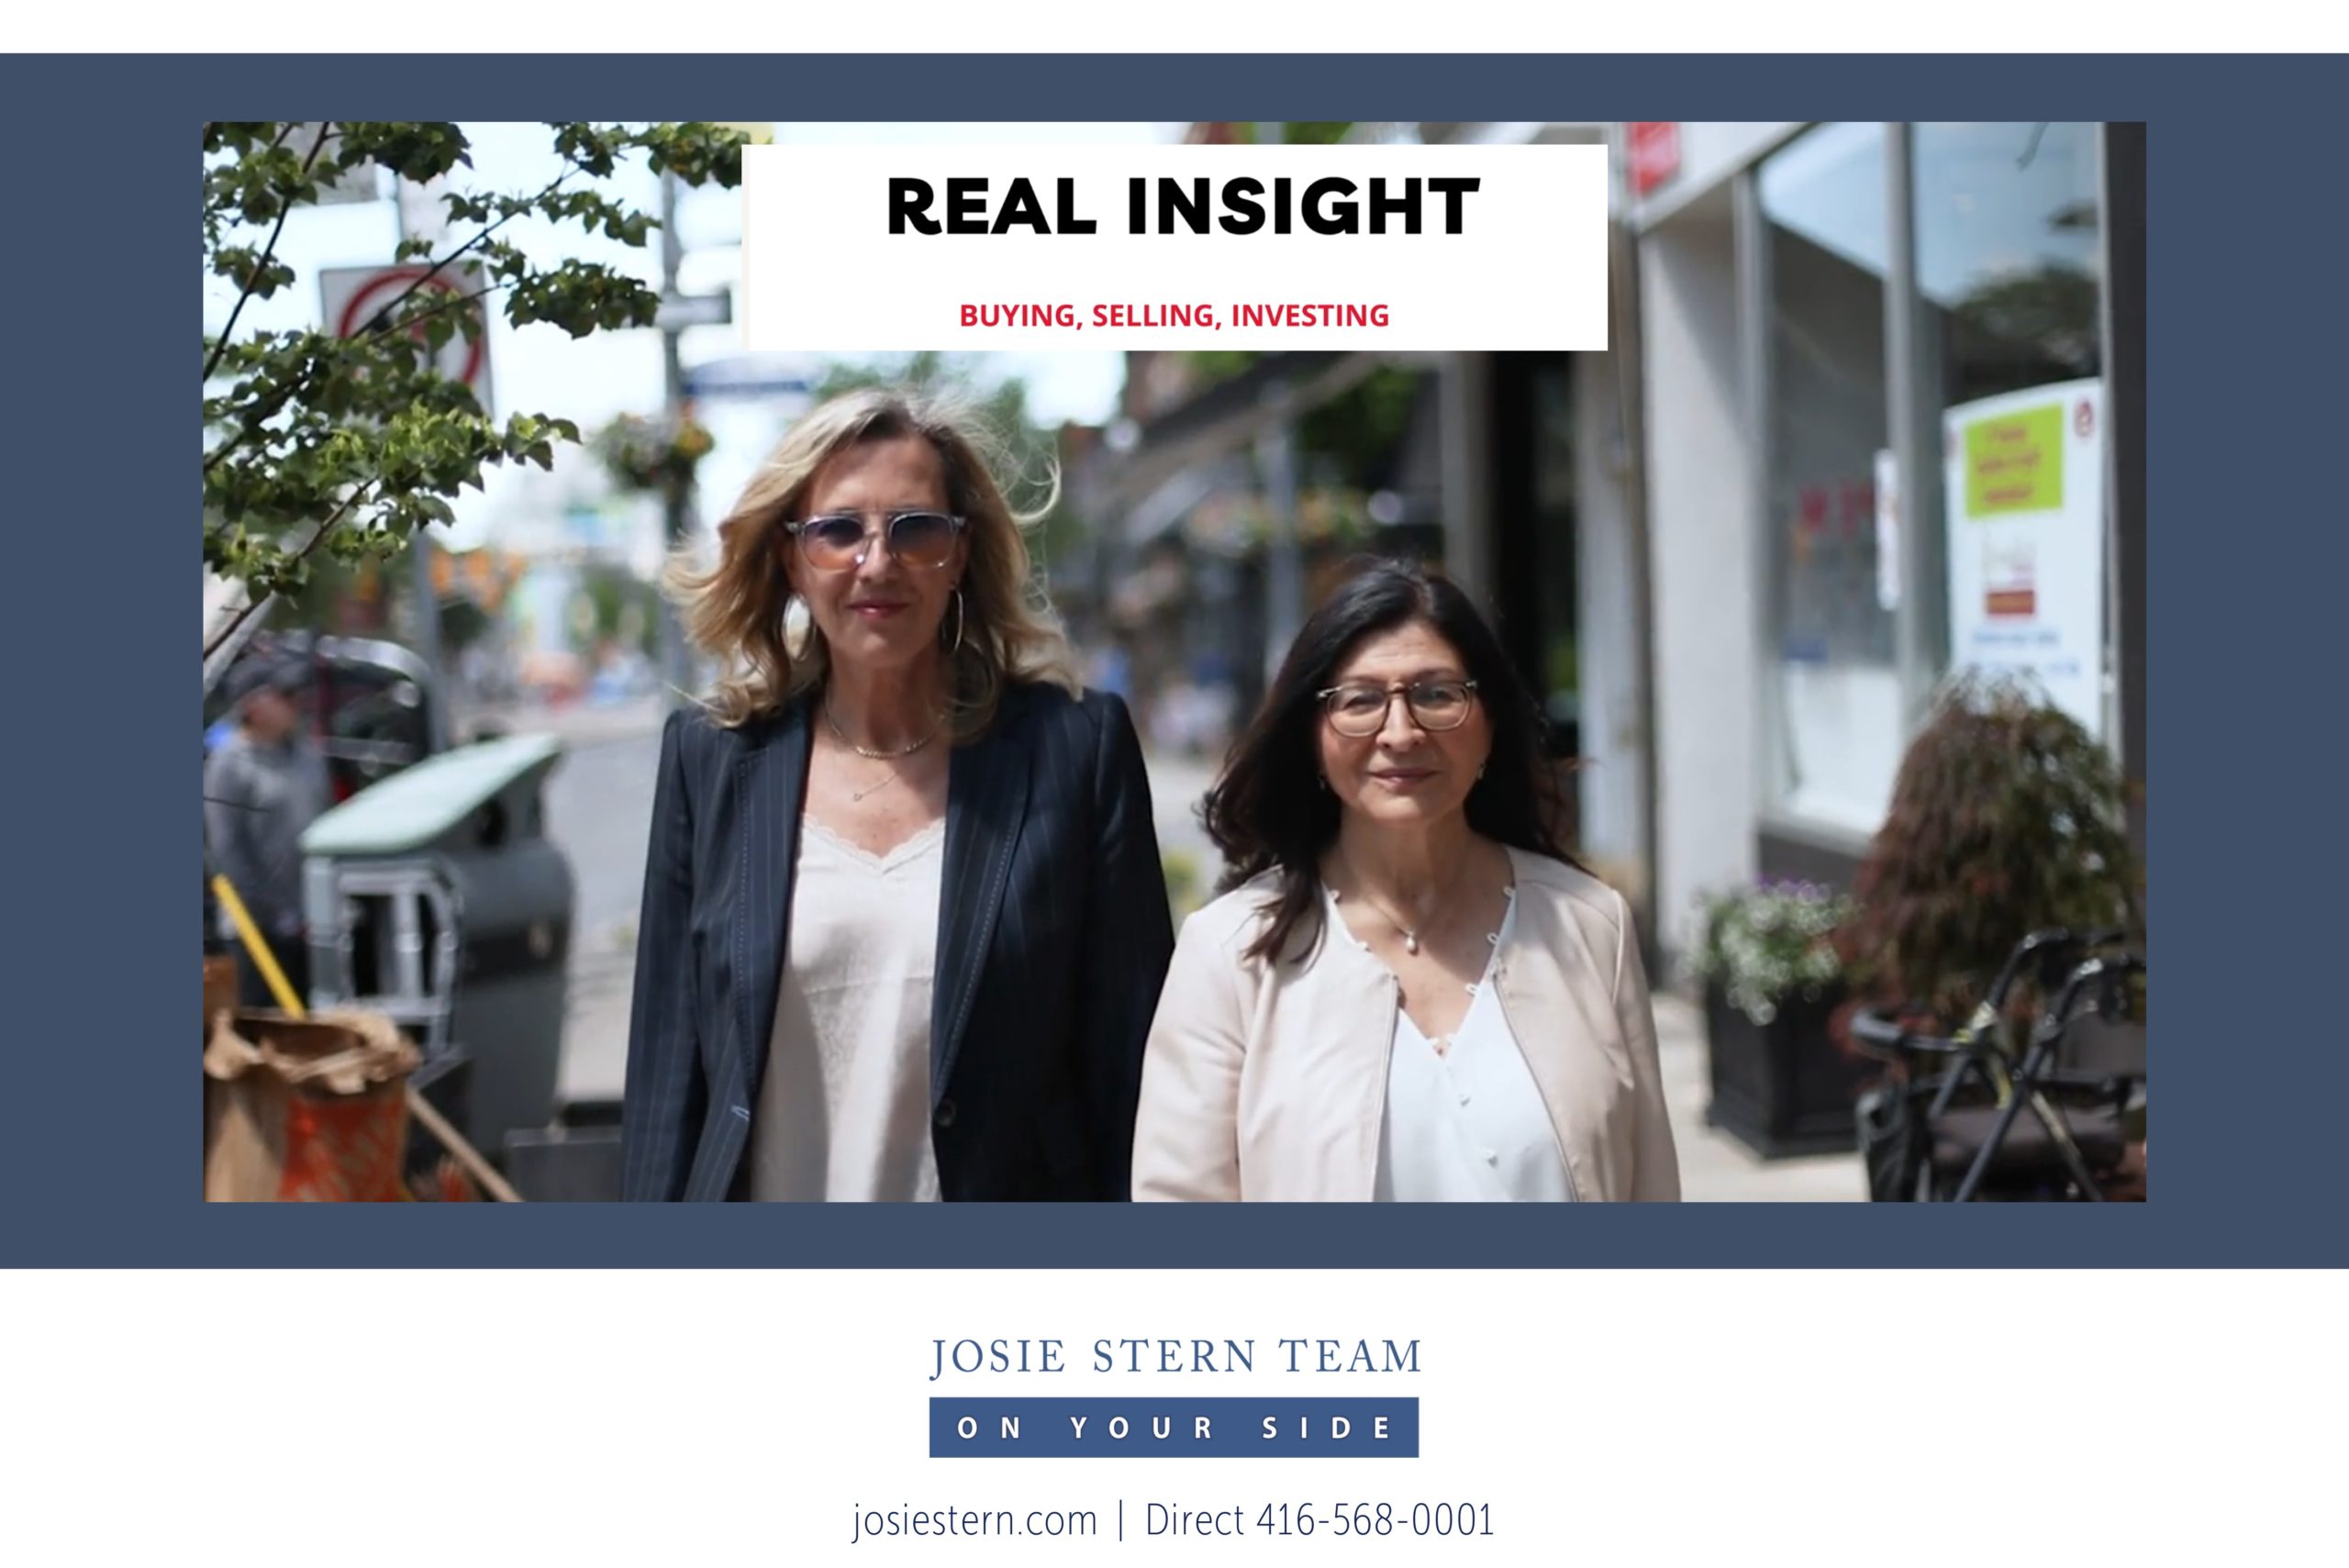 OUR INSIGHT on The Toronto Real Estate Market